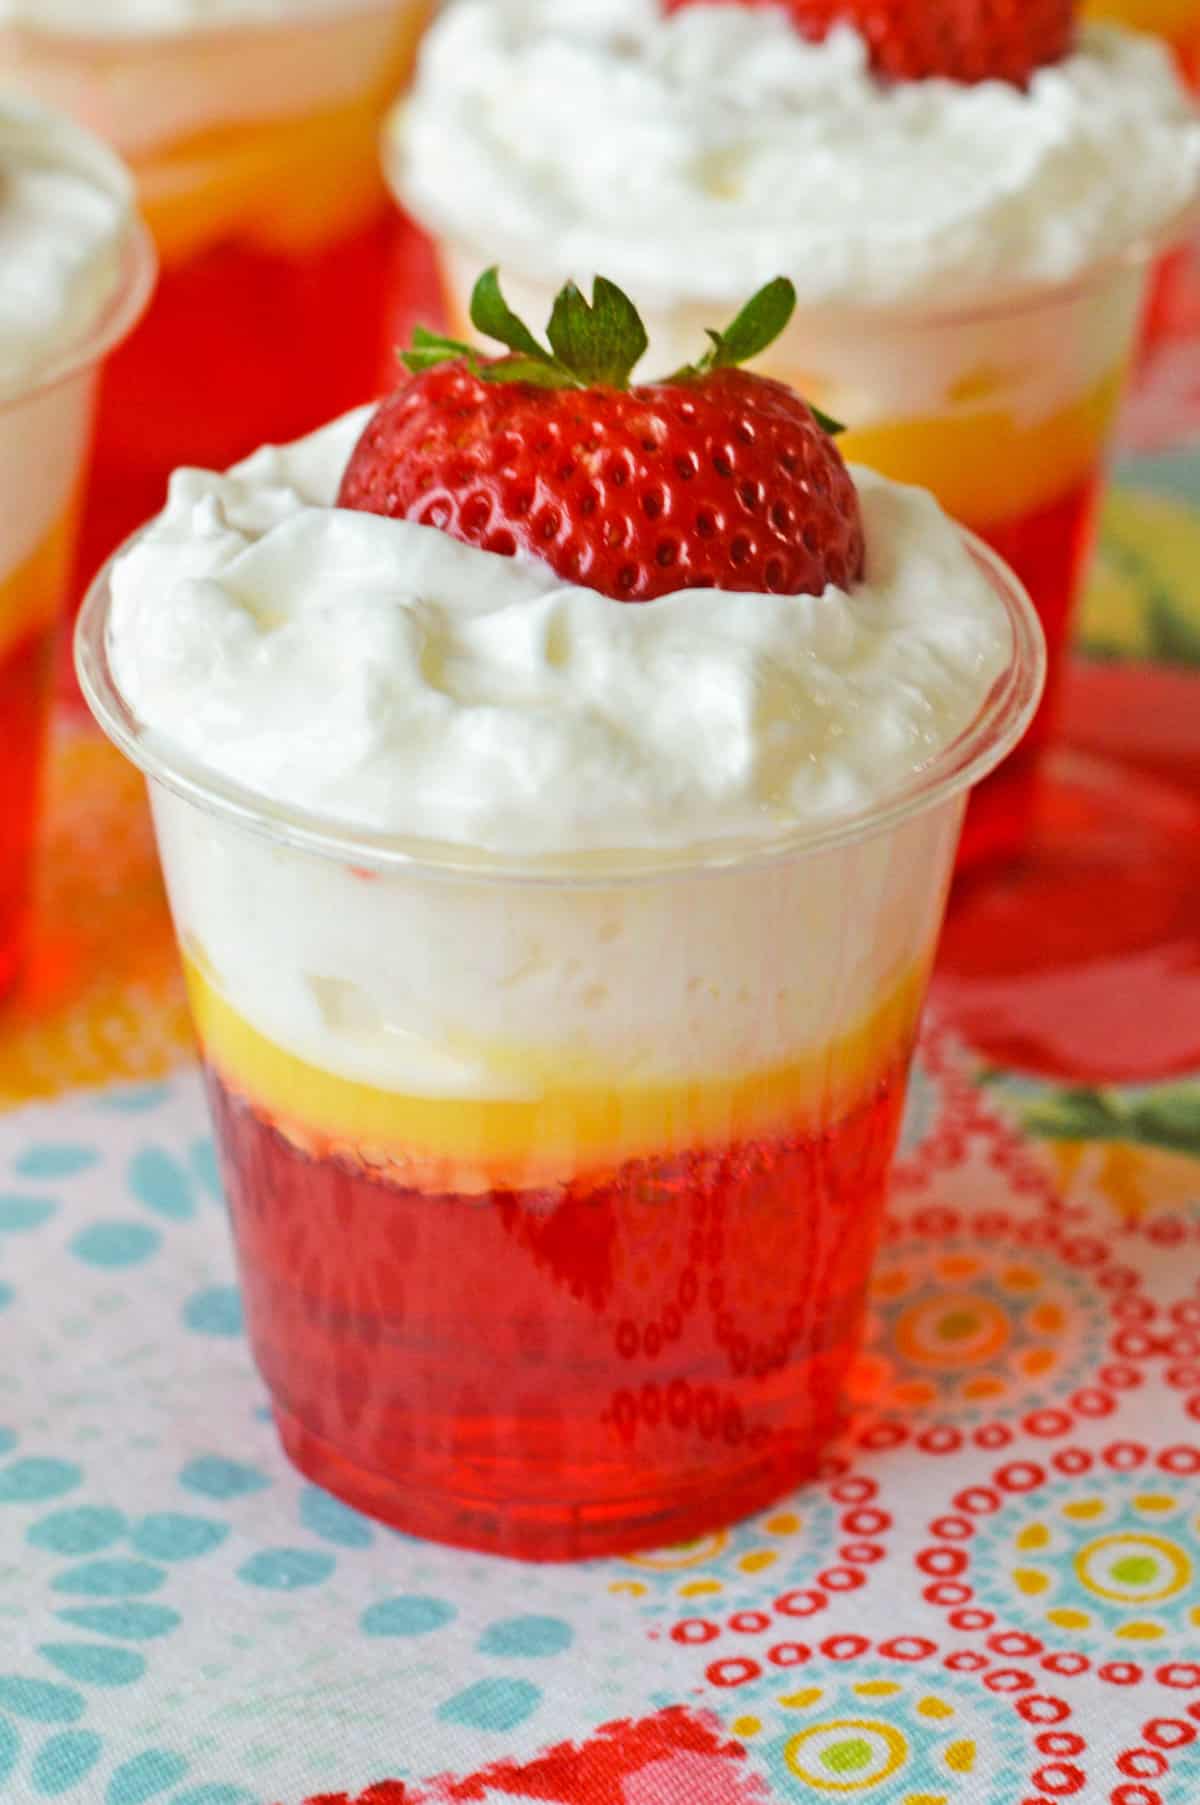 Strawberry and cream vodka jello shots topped with whipped cream and strawberry.